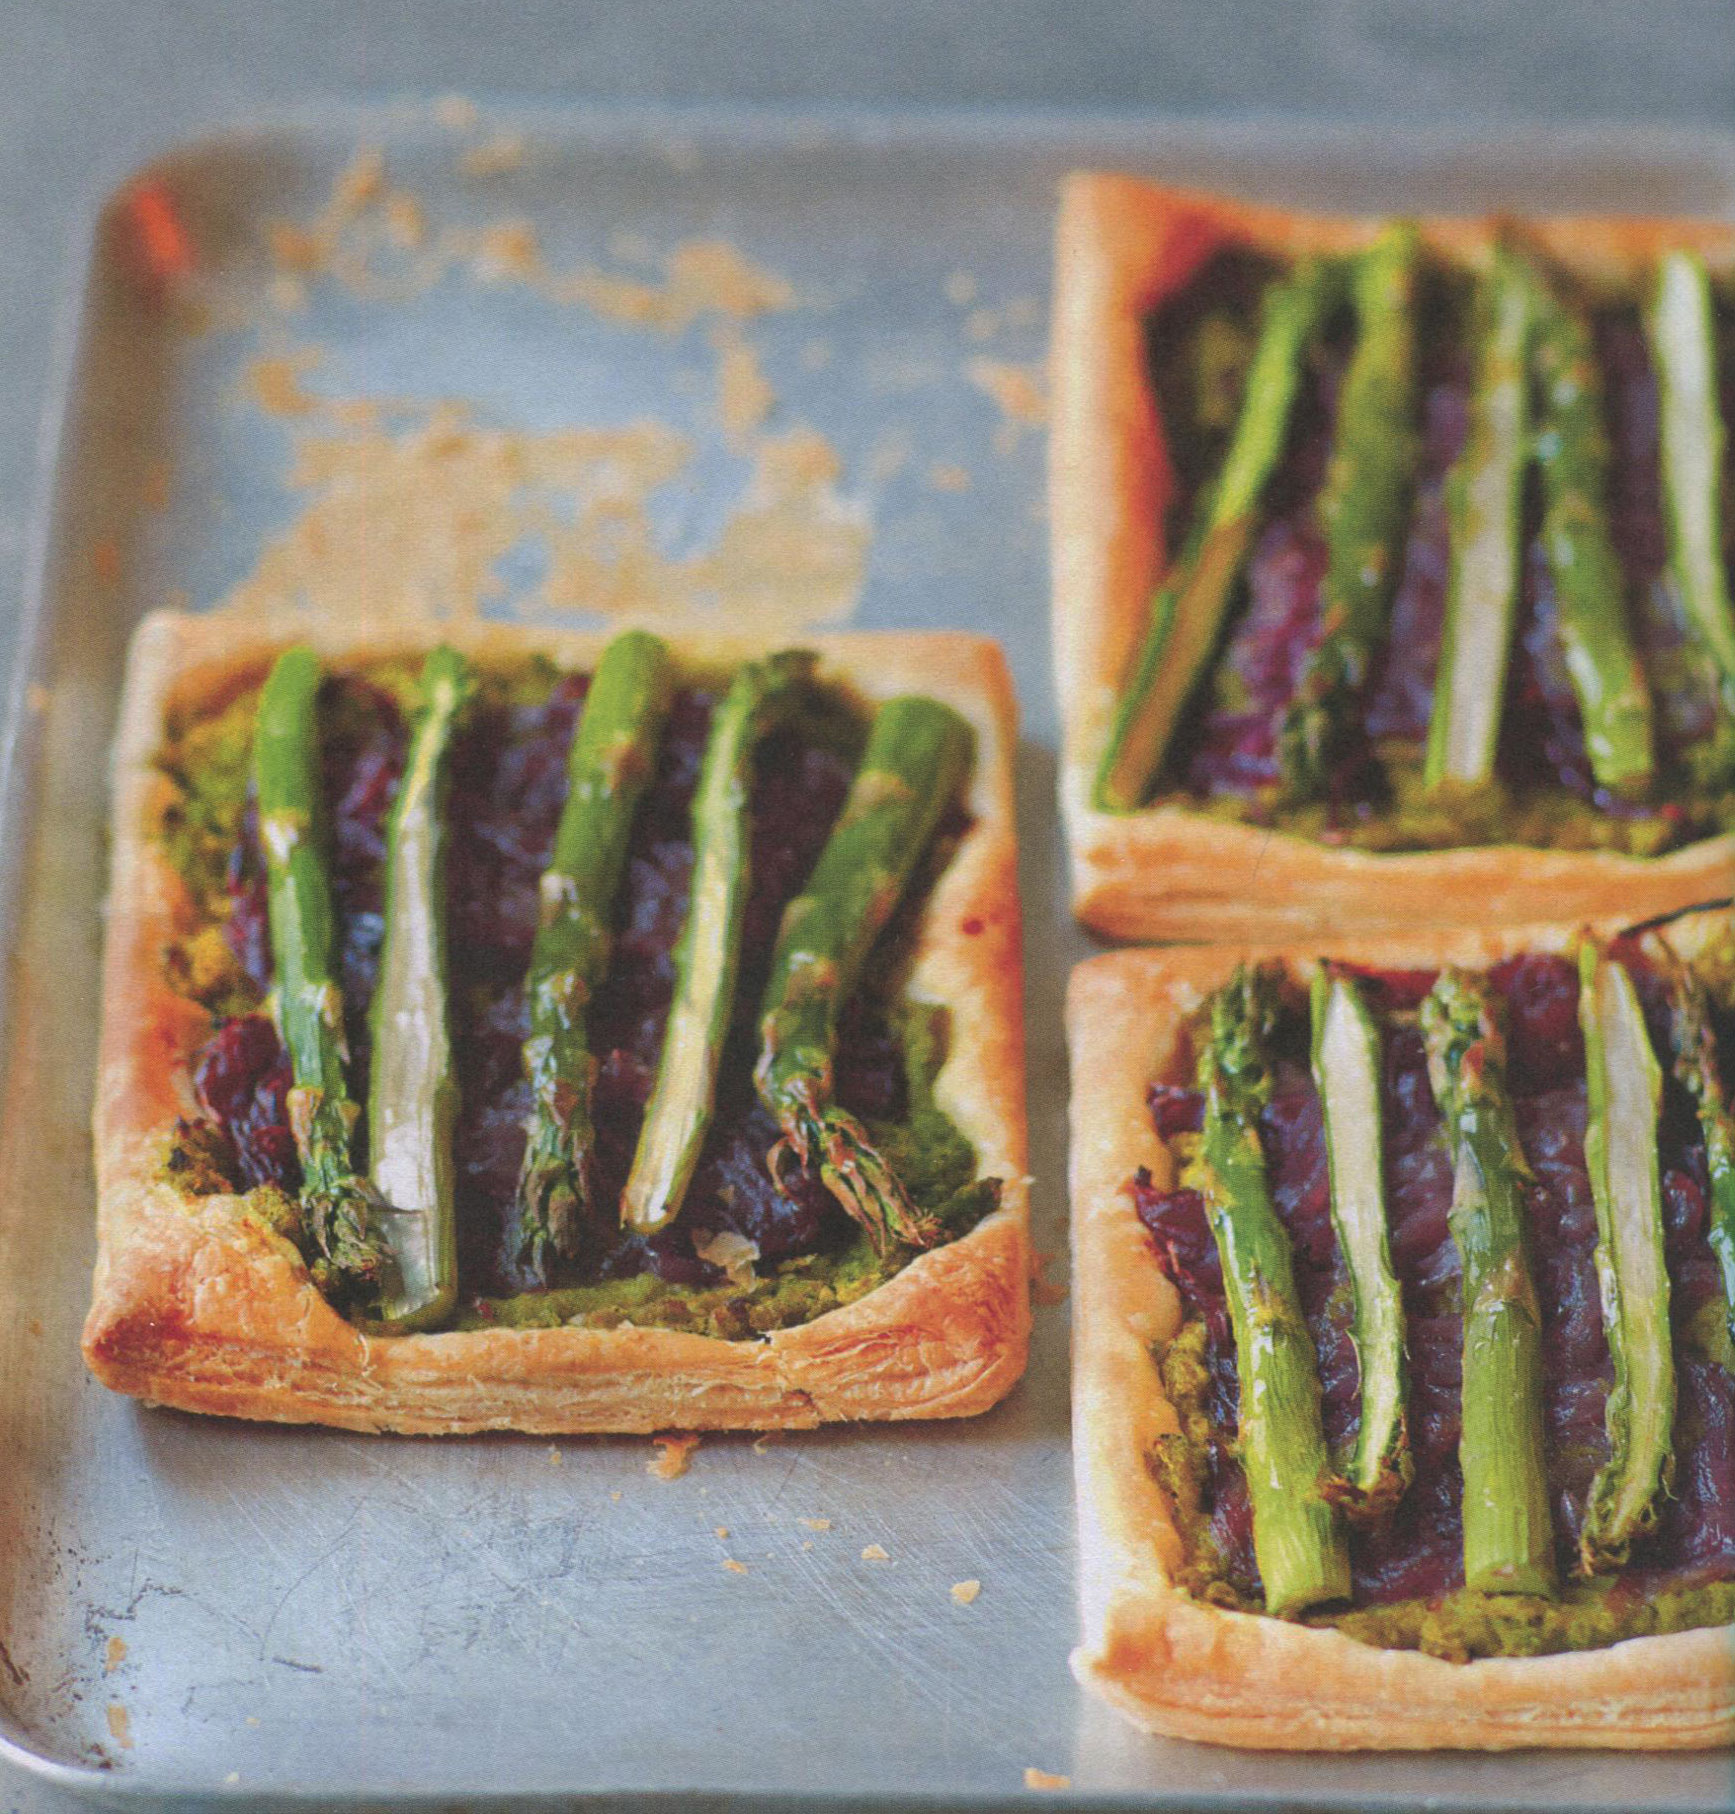 TBT Recipe: Asparagus, Minted Peas, and Caramelized Red Onion Tart